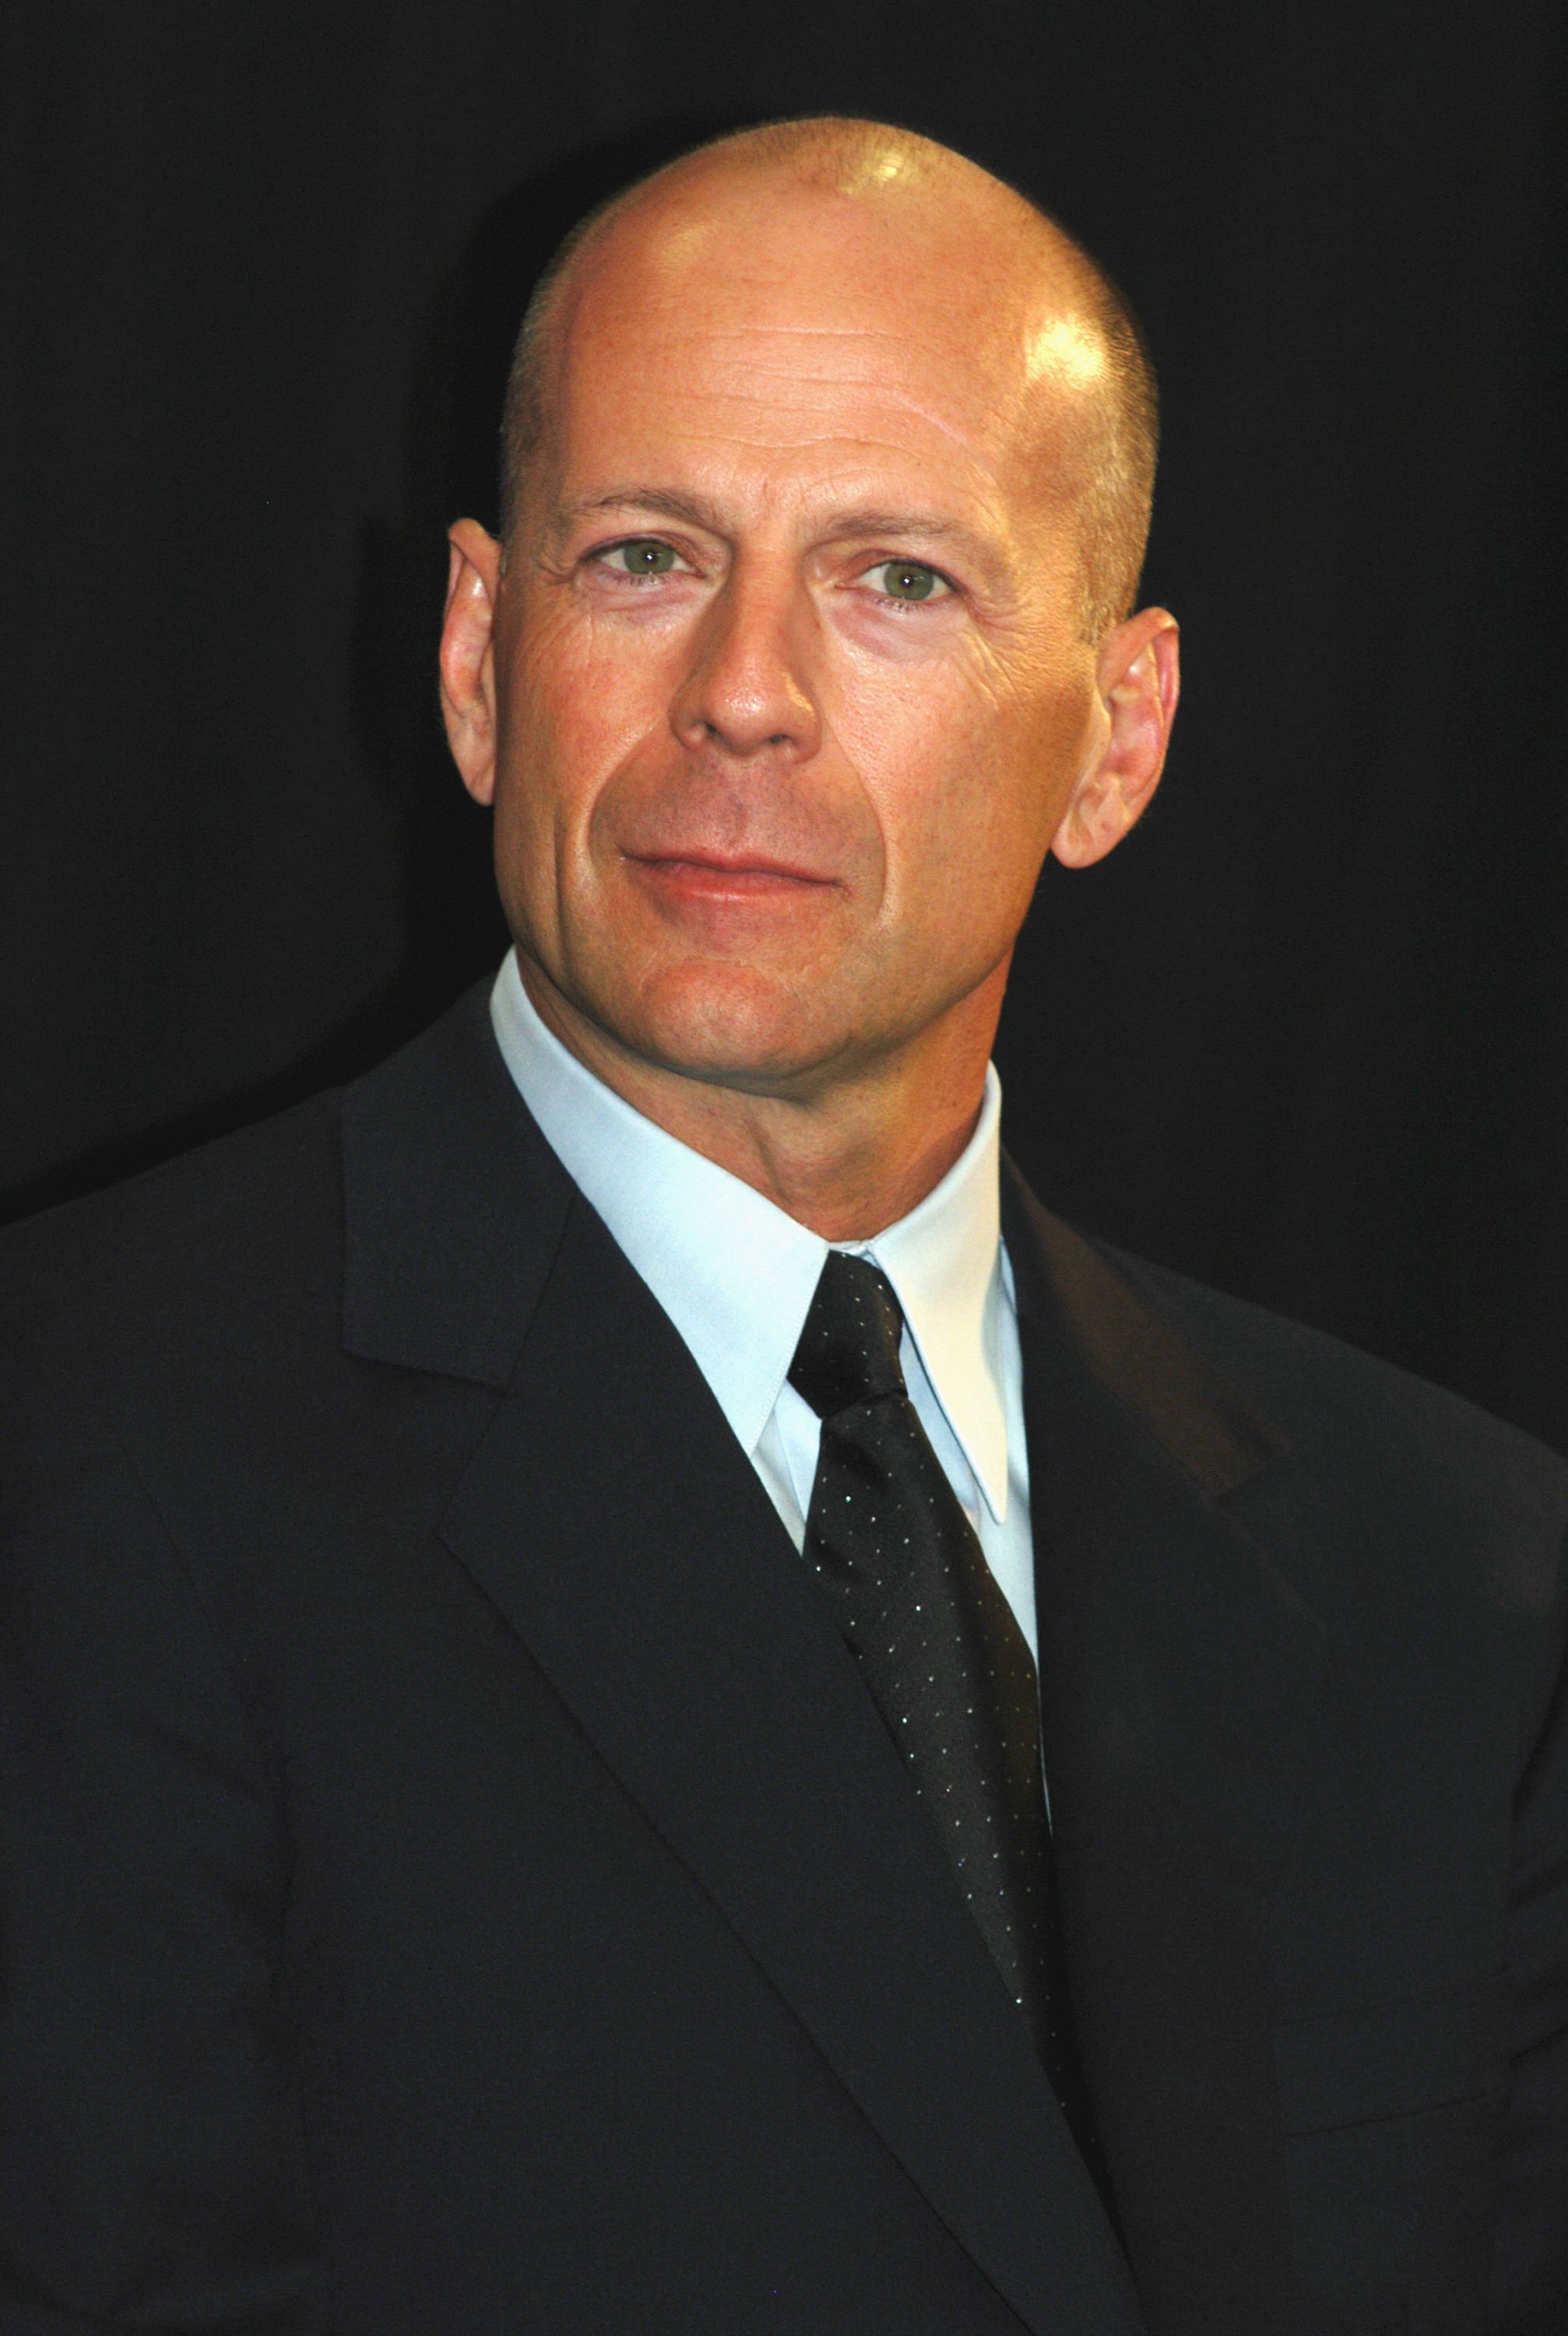 Actor Bruce Willis attends the Los Angeles National Day press conference at the Edmund D. Edelman Children's Court on November 23, 2002 in Monterey Park, California ┃Source: Getty Images